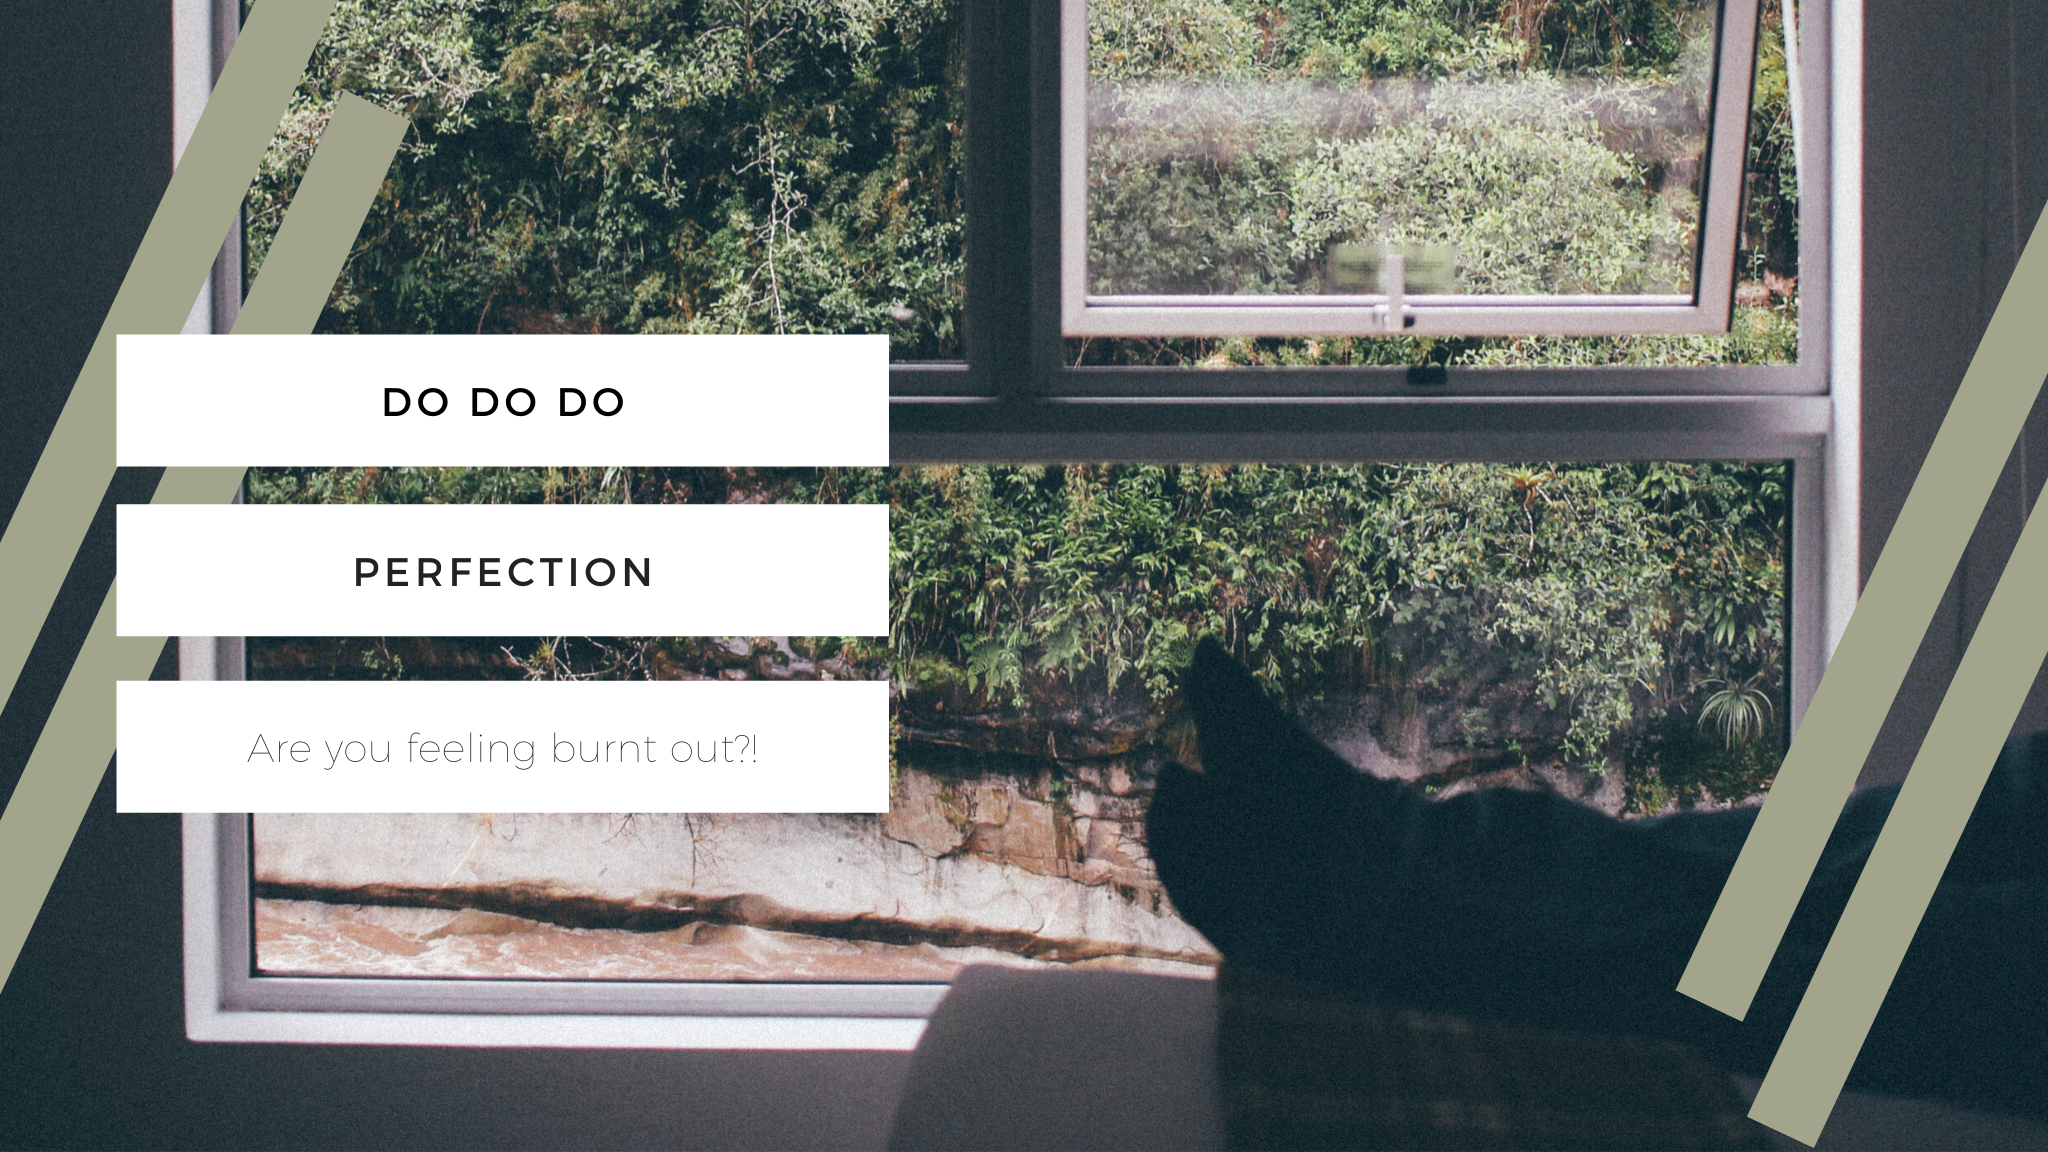 Distraction: Performance & Perfection